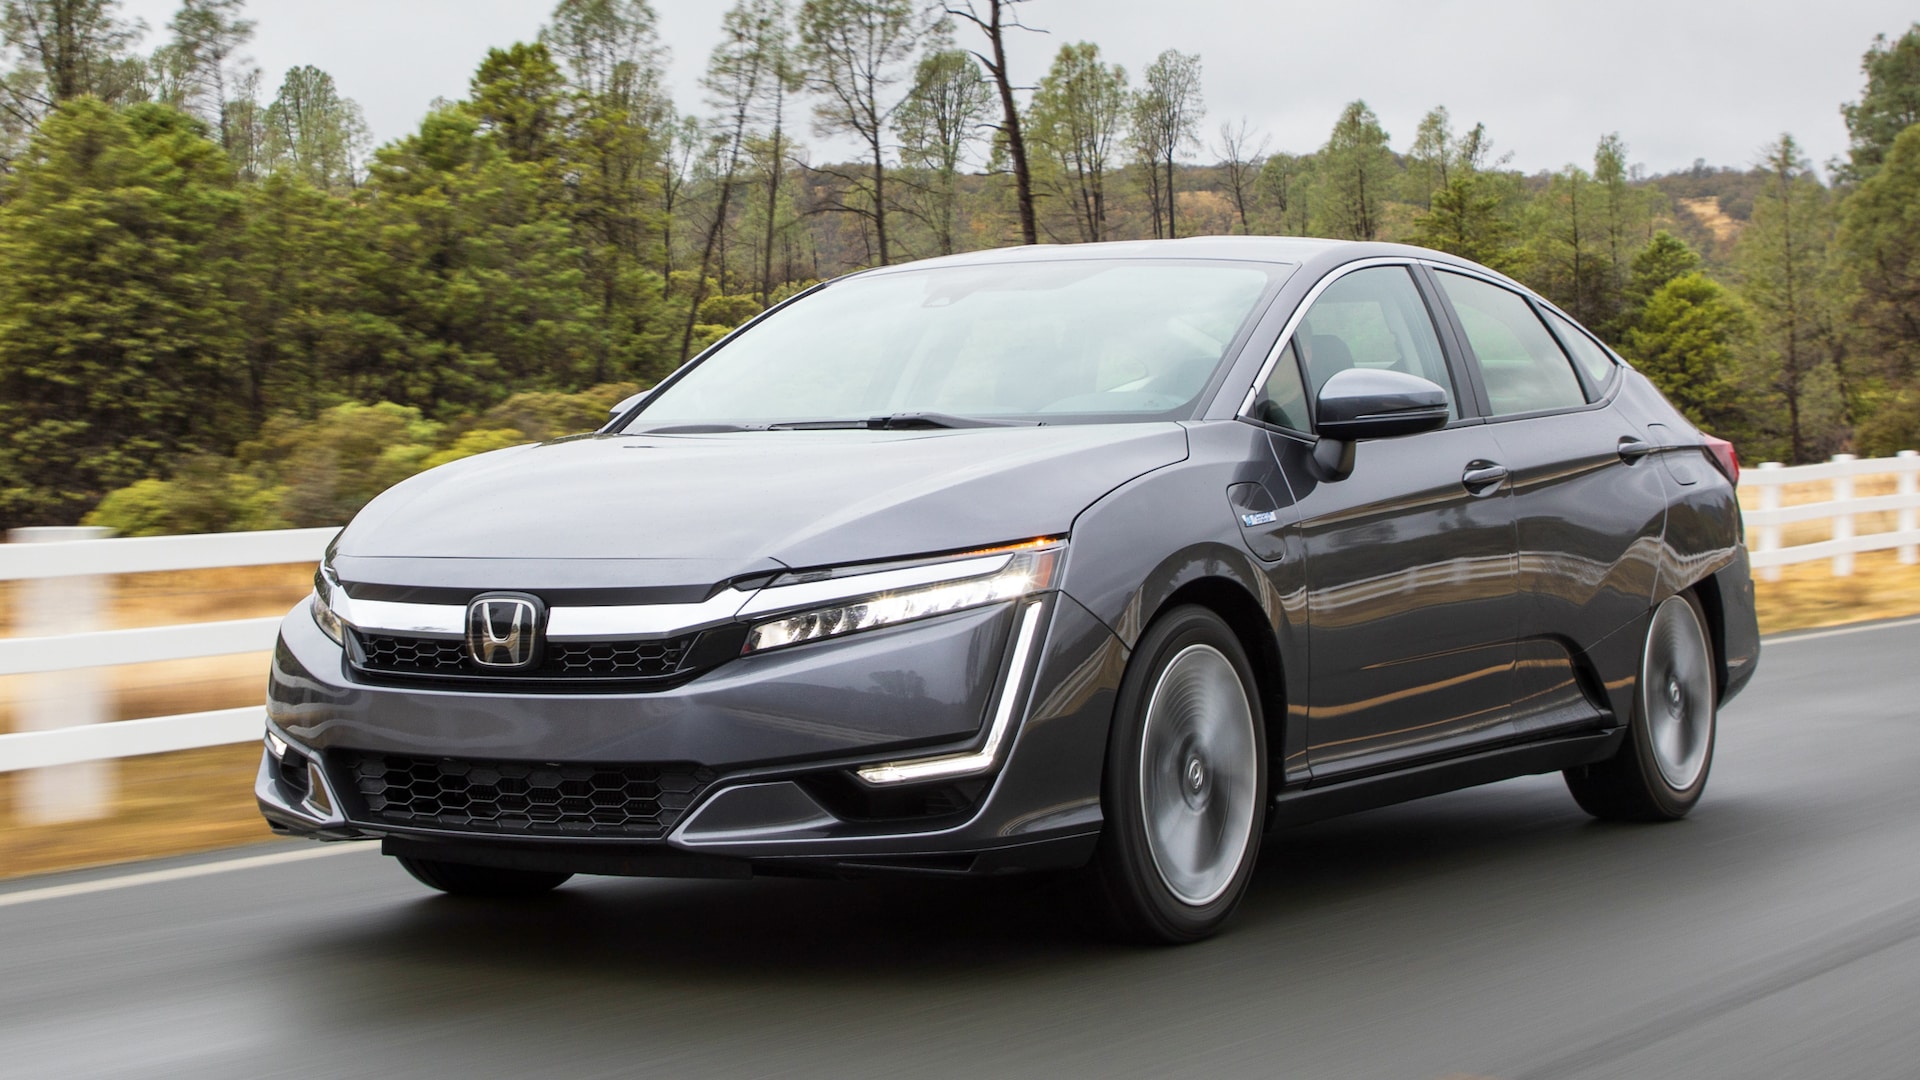 2021 Honda Clarity Prices, Reviews, and Photos - MotorTrend